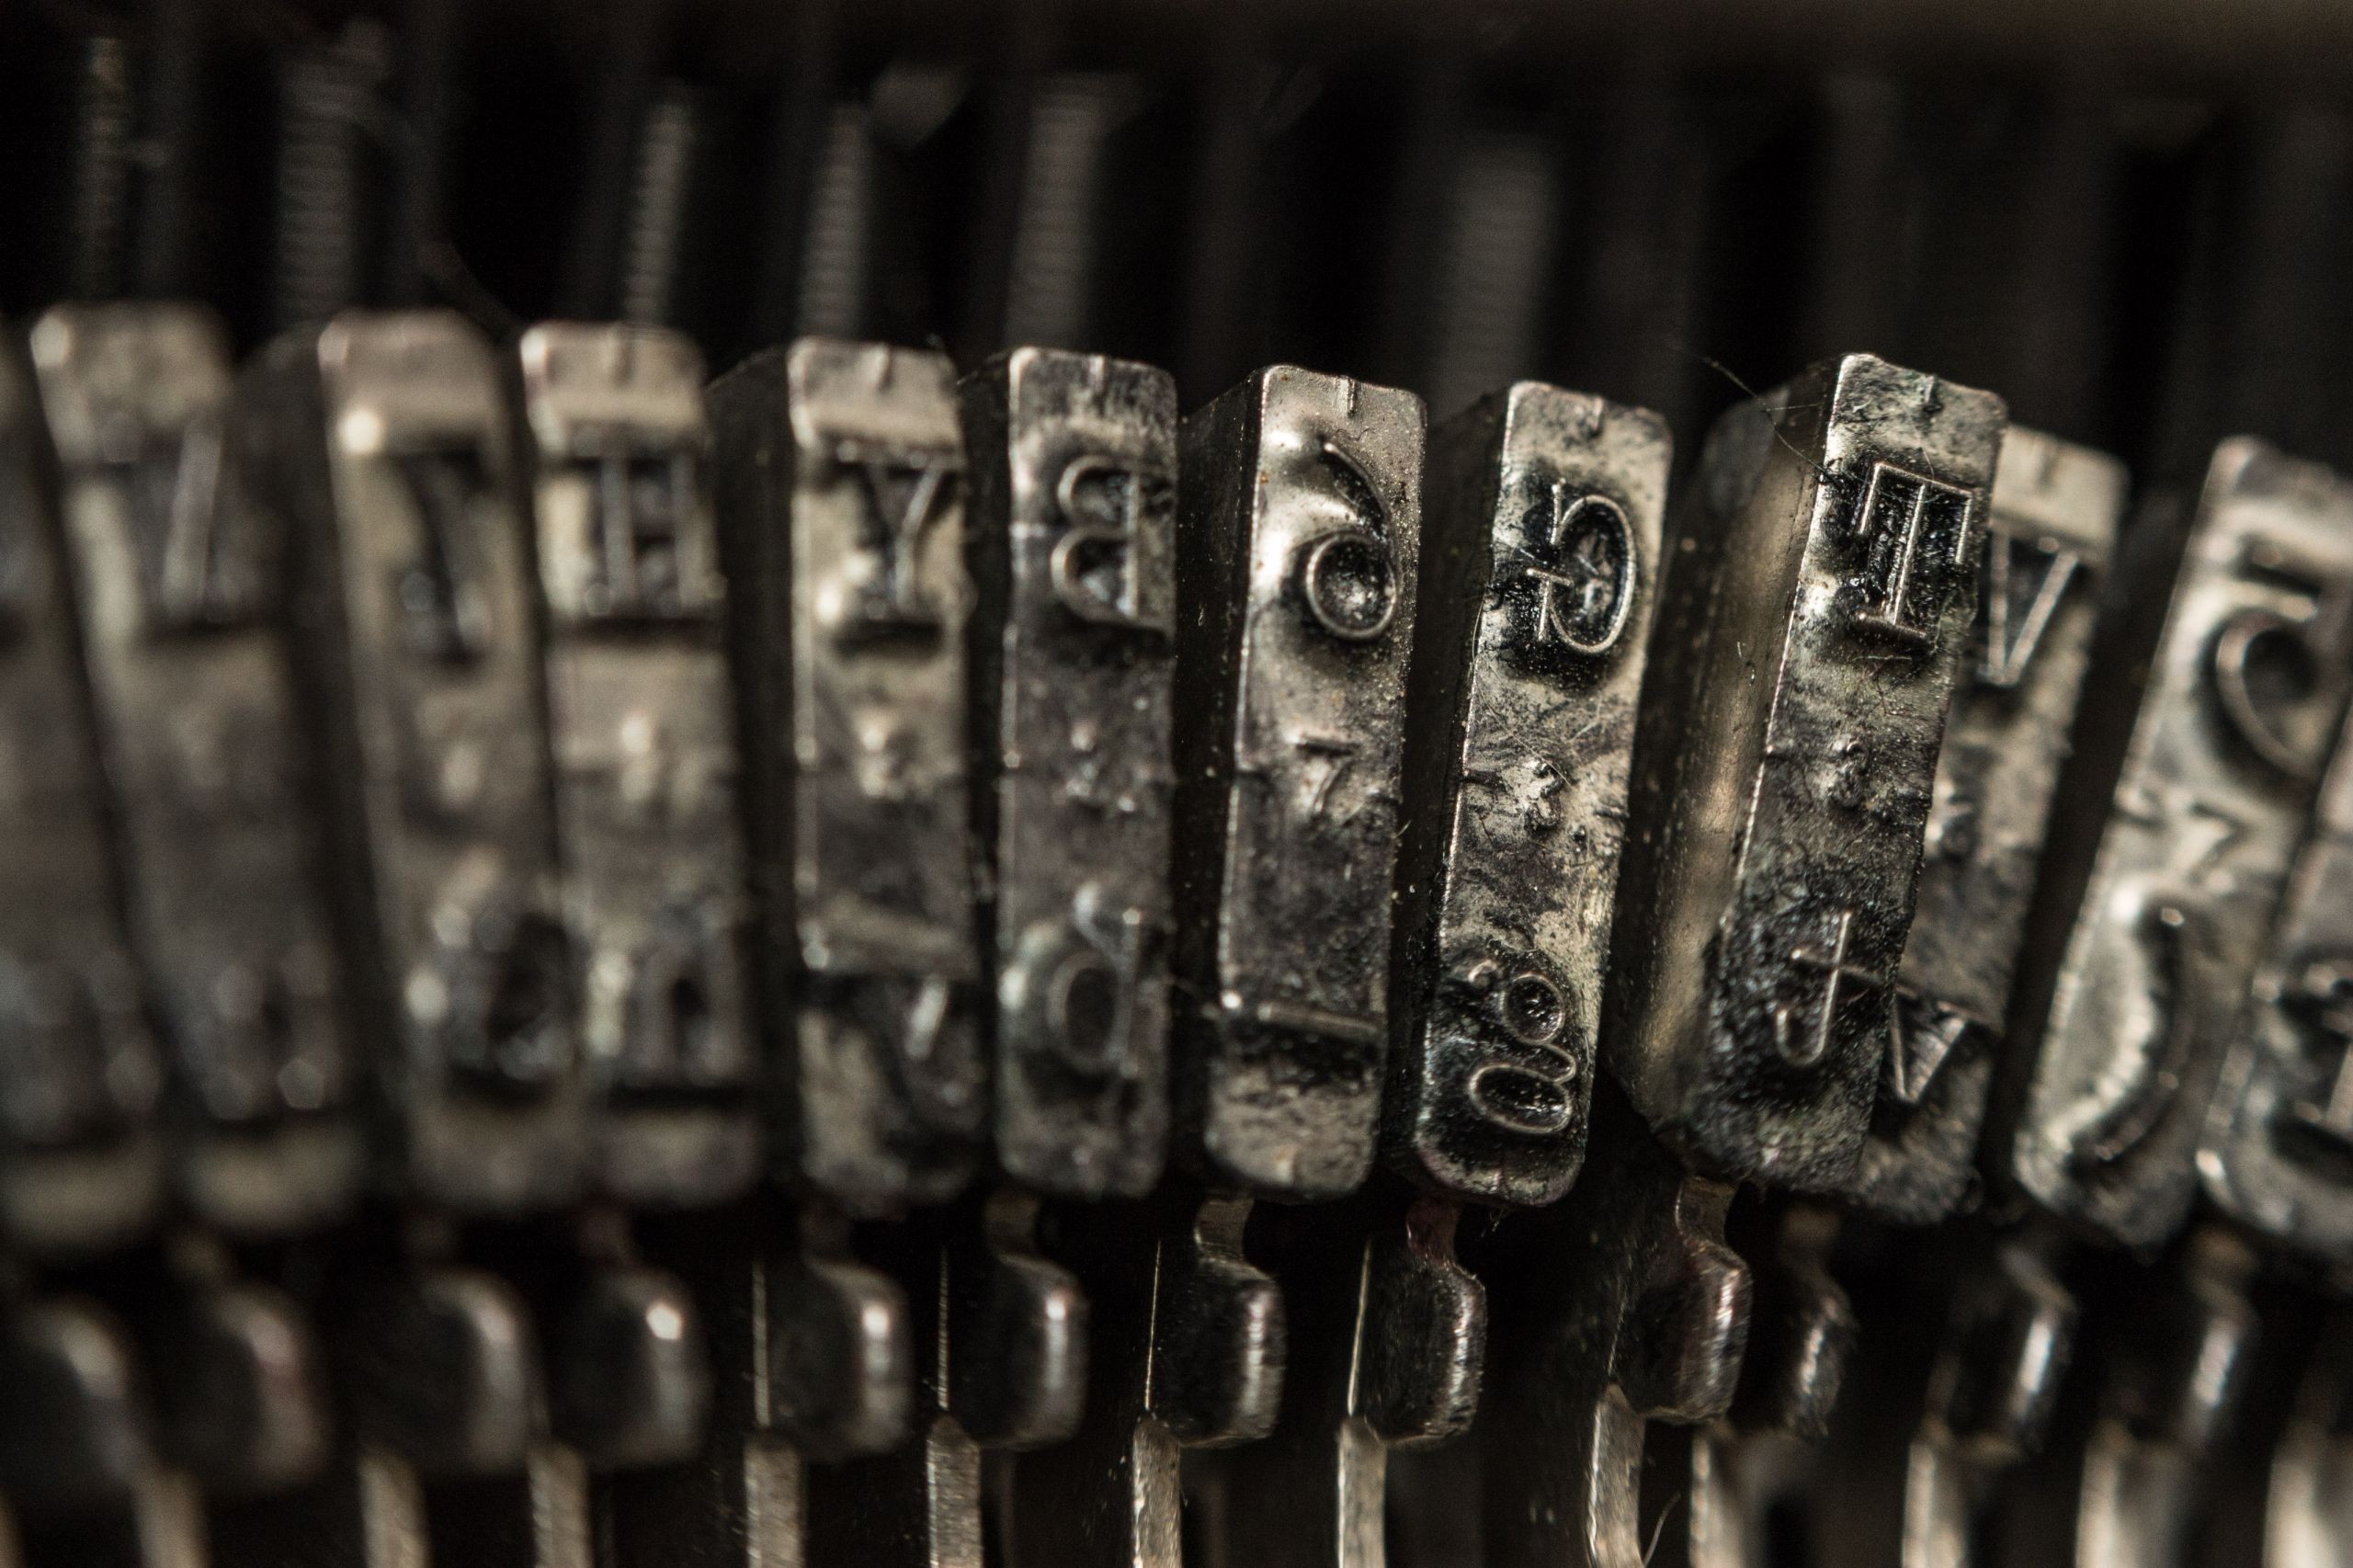 General 2560x1706 typography typewriters vintage technology monochrome metal depth of field mirrored